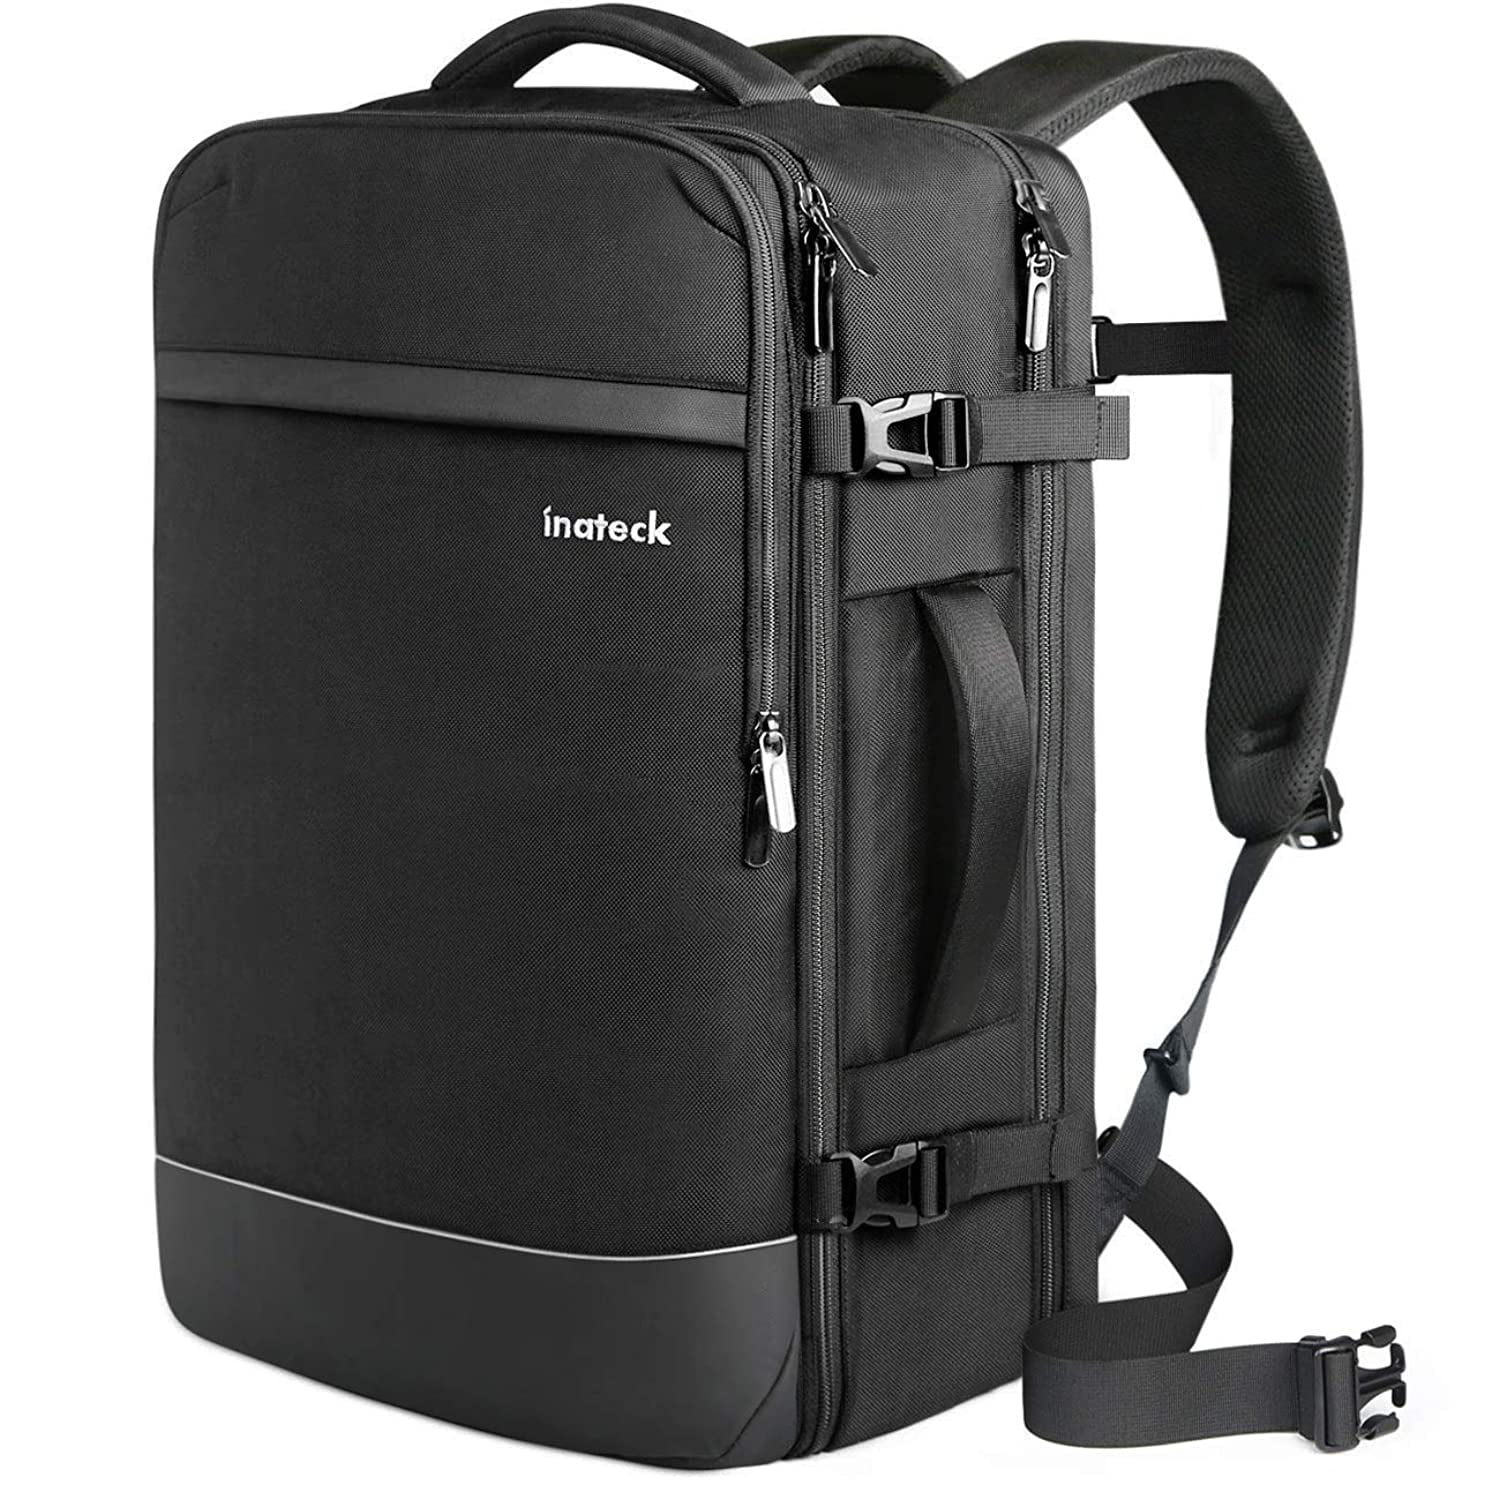 Inateck 40-44L Professional Carry on Travel Backpack, TSA Friendly ...